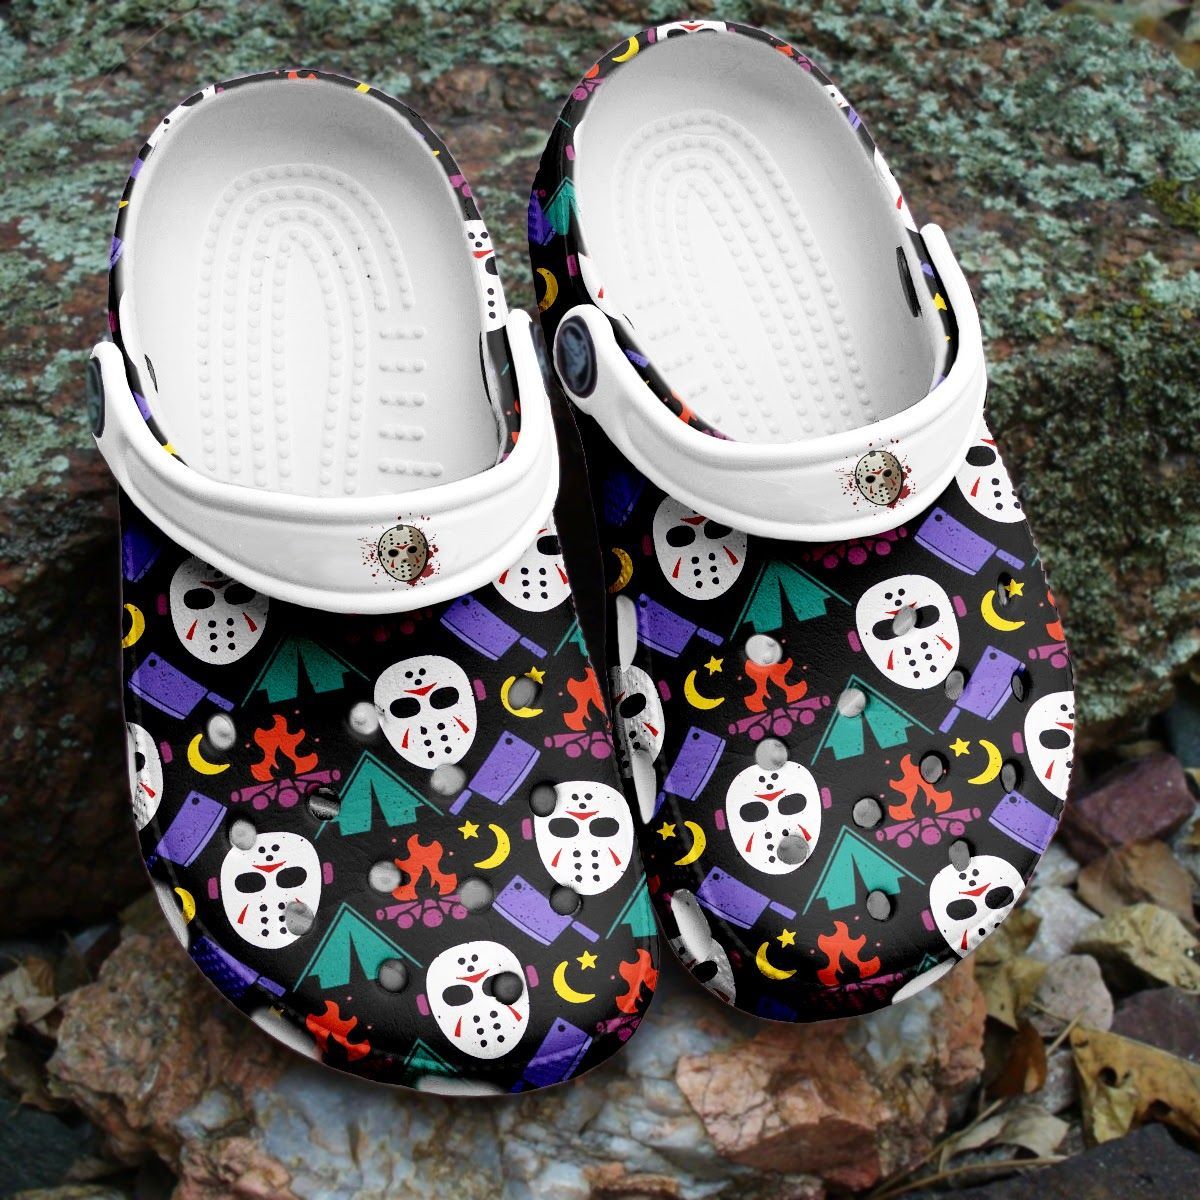 If you'd like to purchase a pair of Crocband Clogs, be sure to check out the official website. 193